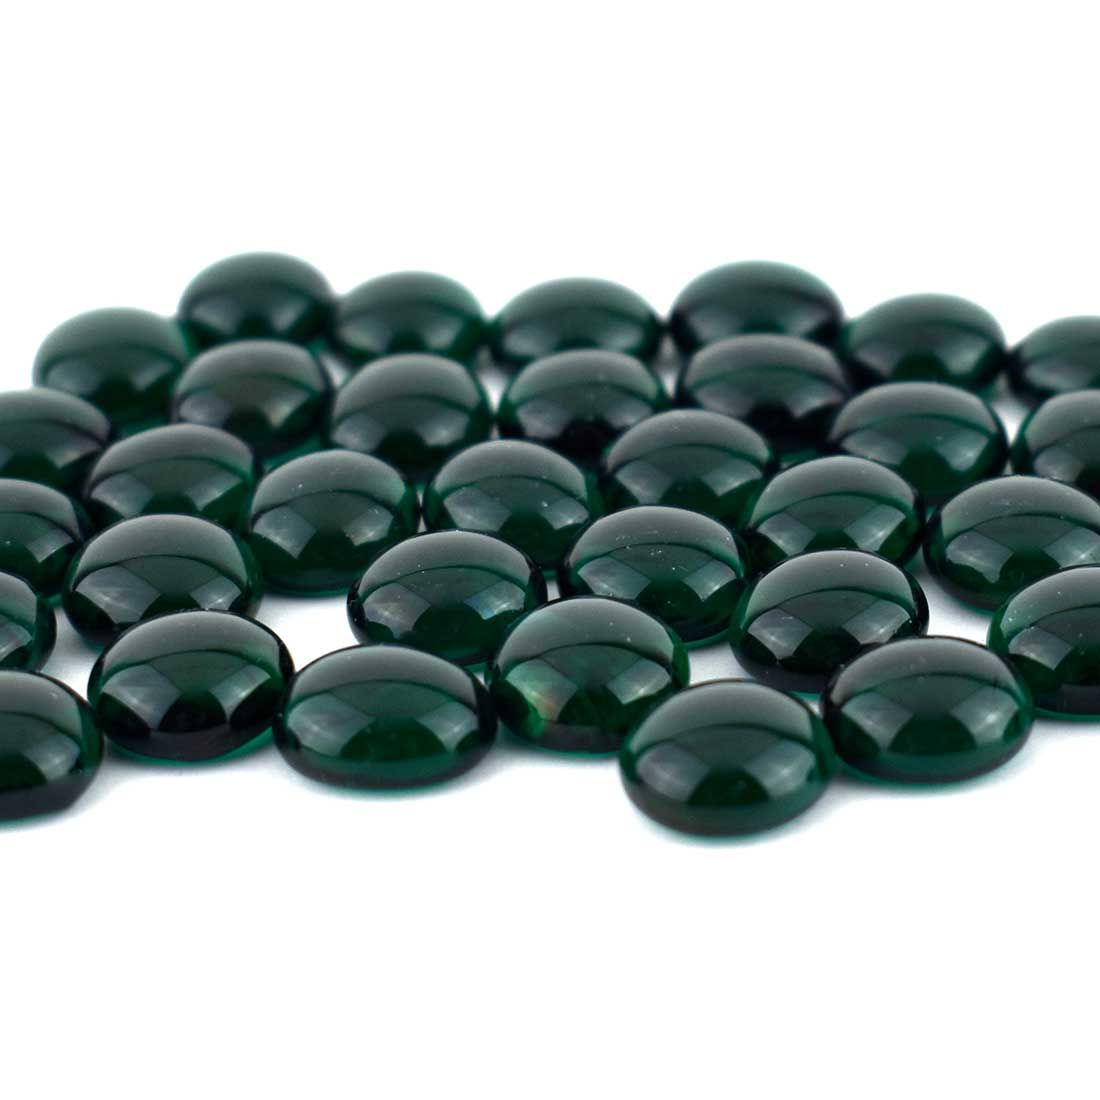 TEAL CATHEDRAL PEBBLES by OCEANSIDE COMPATIBLE & SYS 96 GLASS